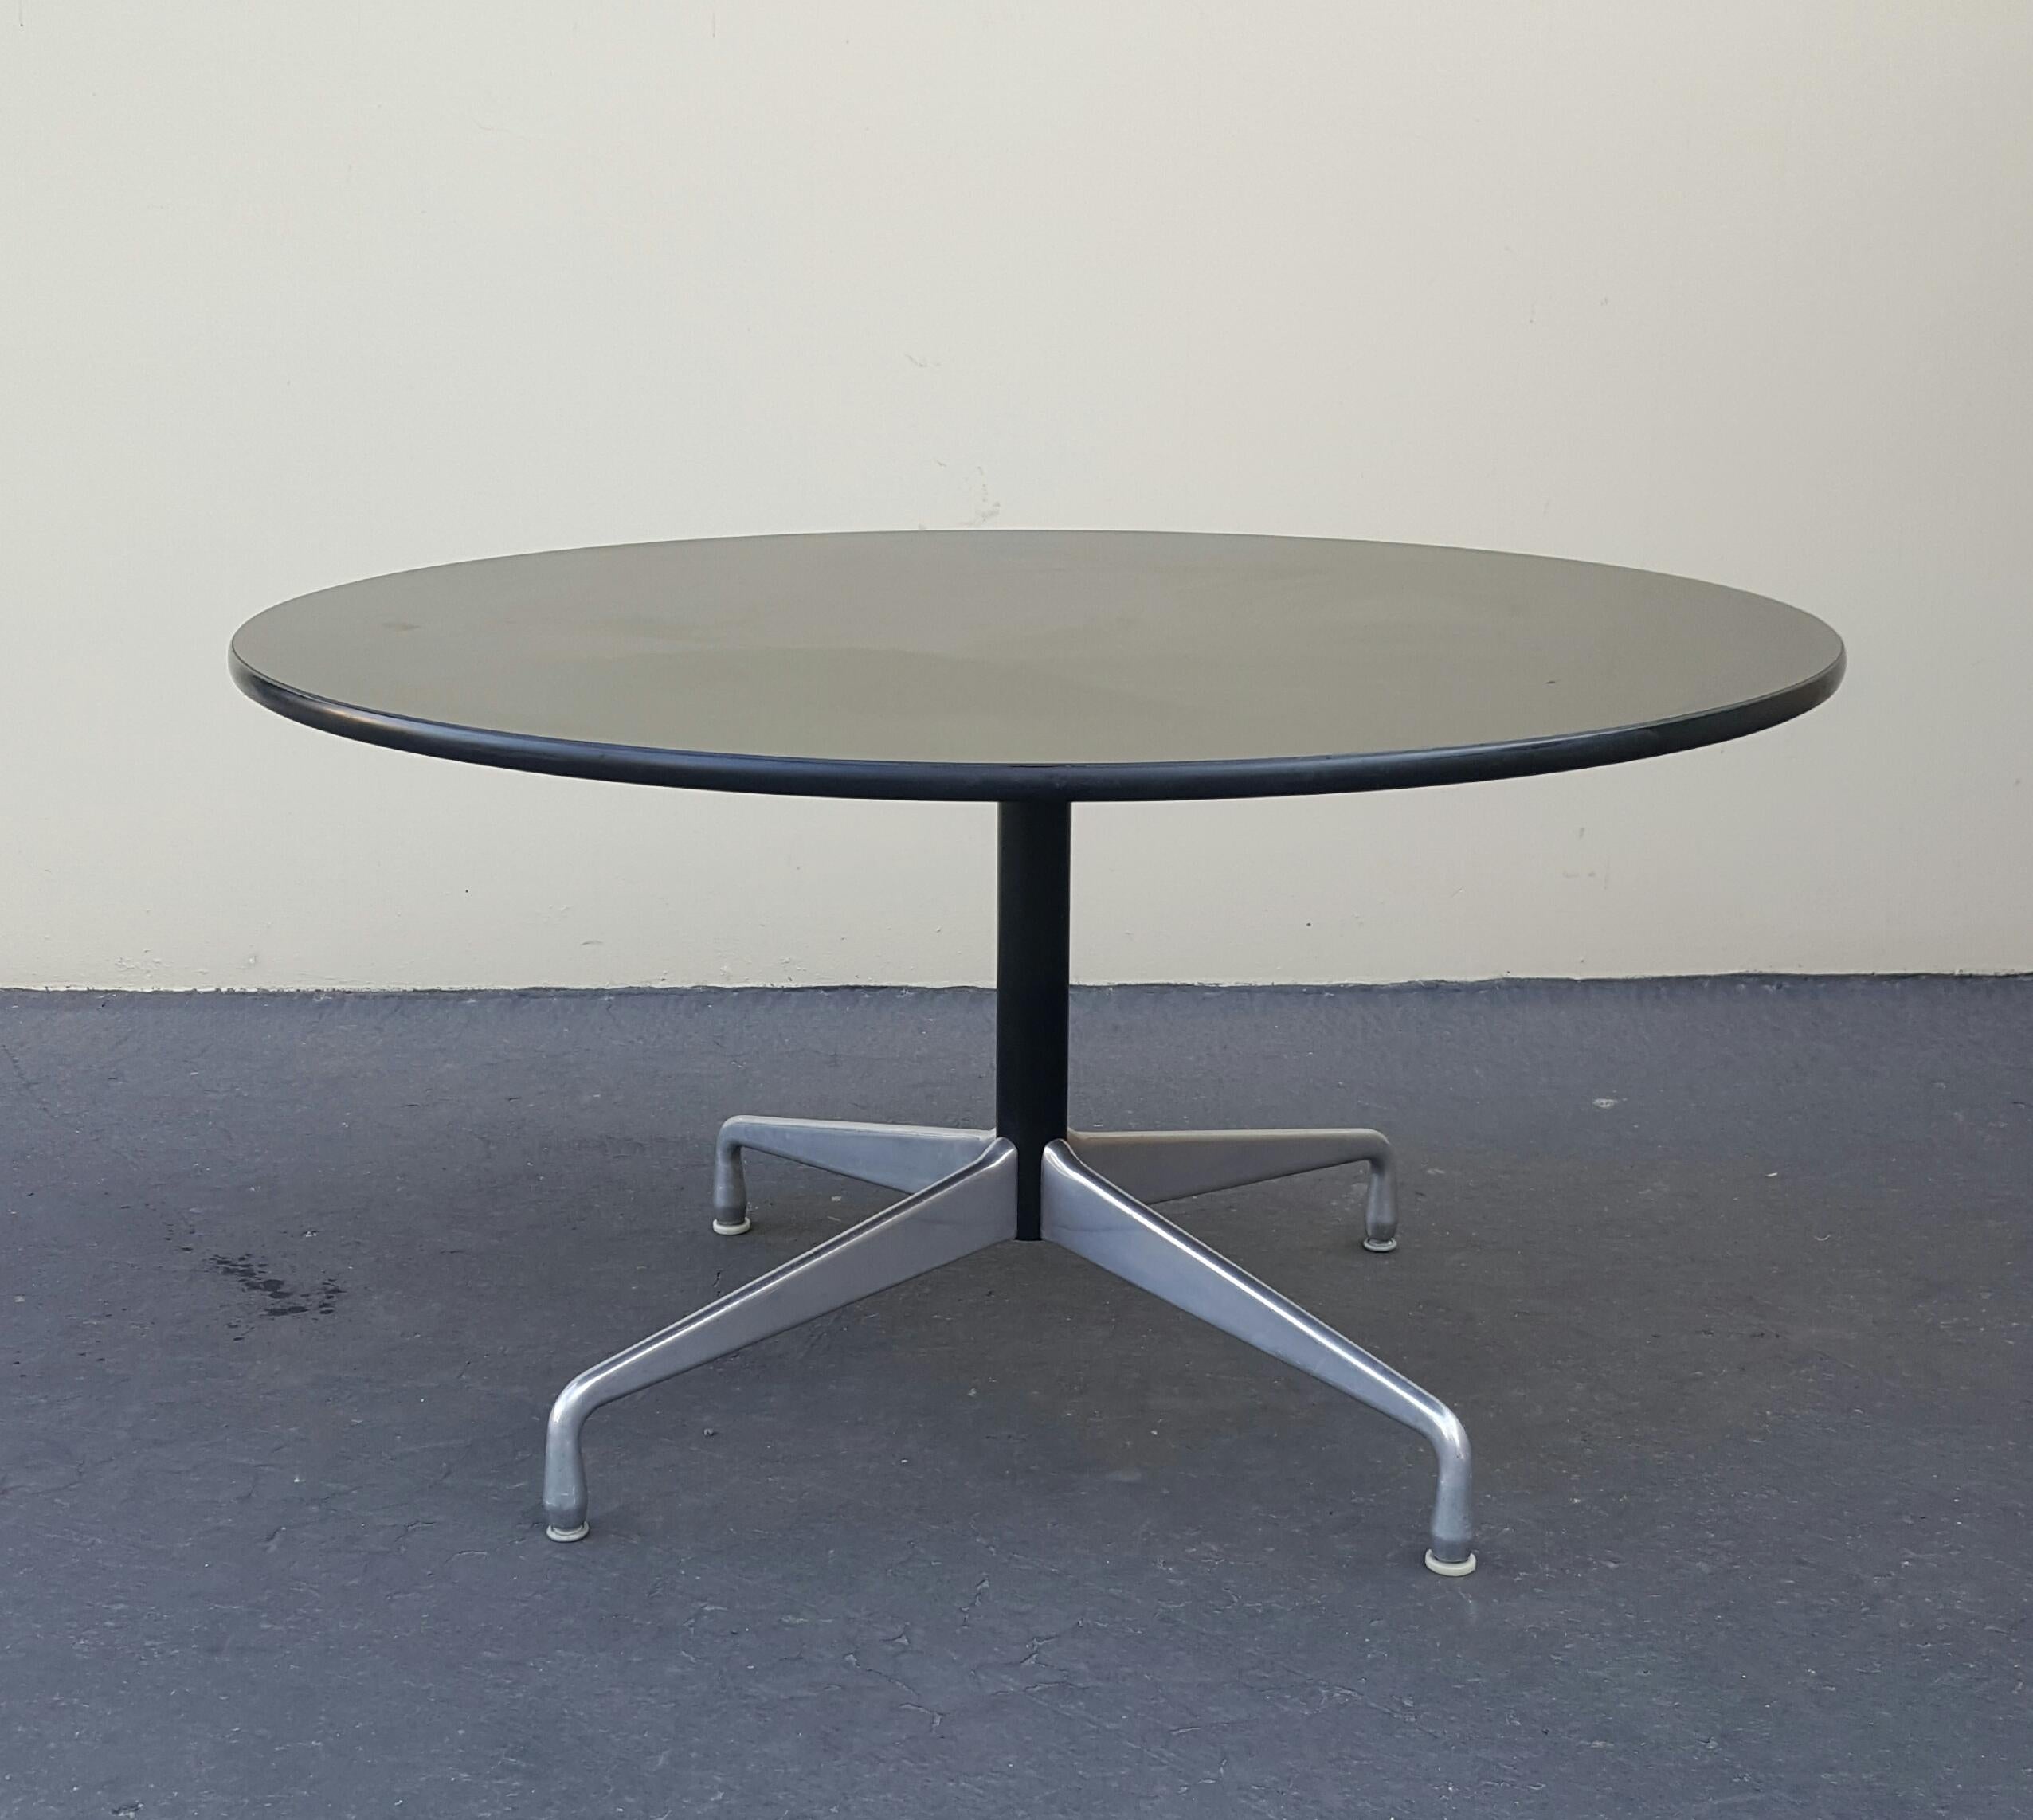 1960s Charles Eames aluminum group conference or dining table with segmented solid aluminum four star base.
this sleek and elegant design by Charles and Ray Eames complements any home or office setting.
Classic Herman Miller dining or conference